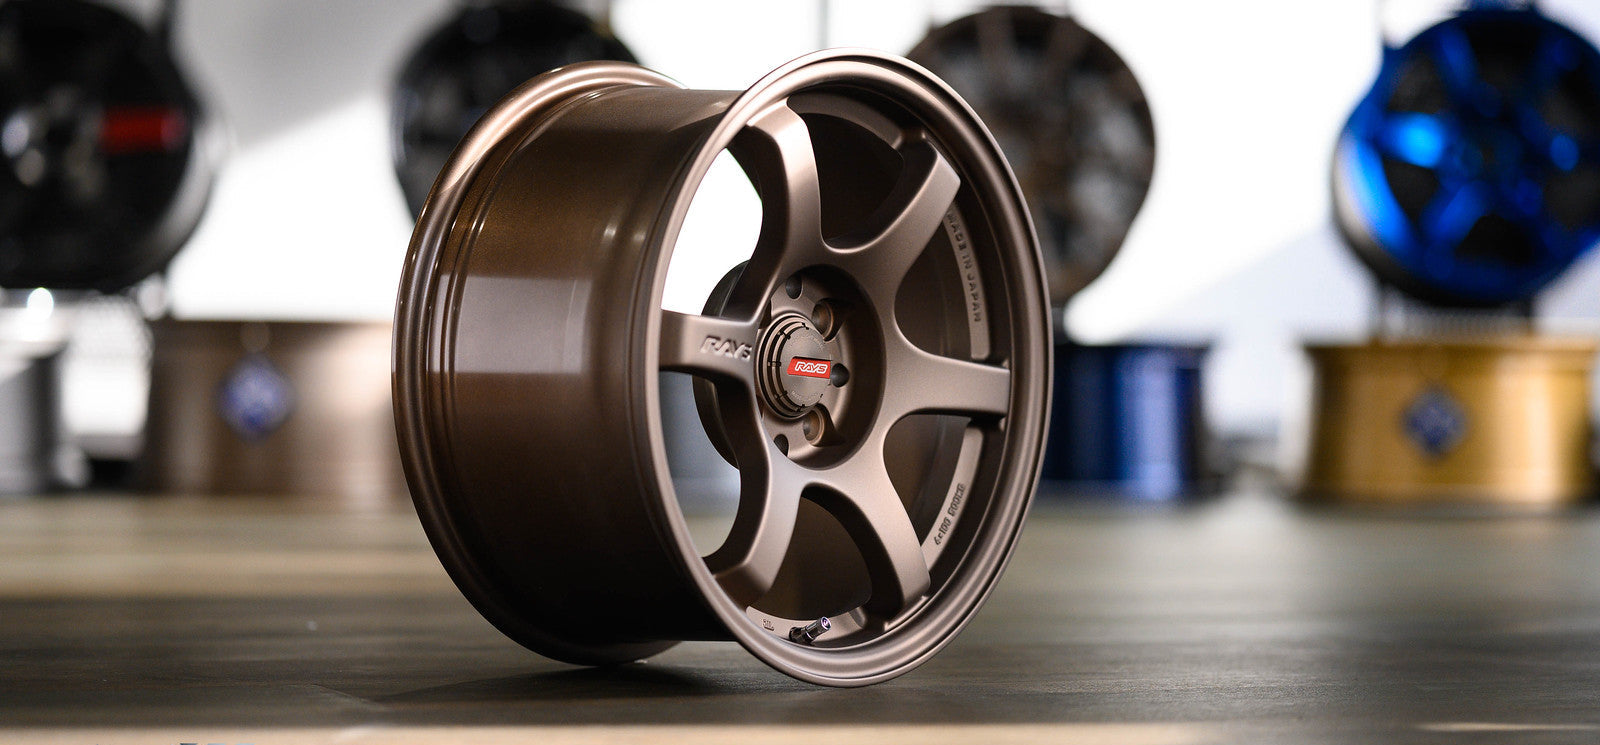 gramLIGHTS 57DR 18" - Premium Wheels from Gram Lights - From just $2190.0! Shop now at MK MOTORSPORTS